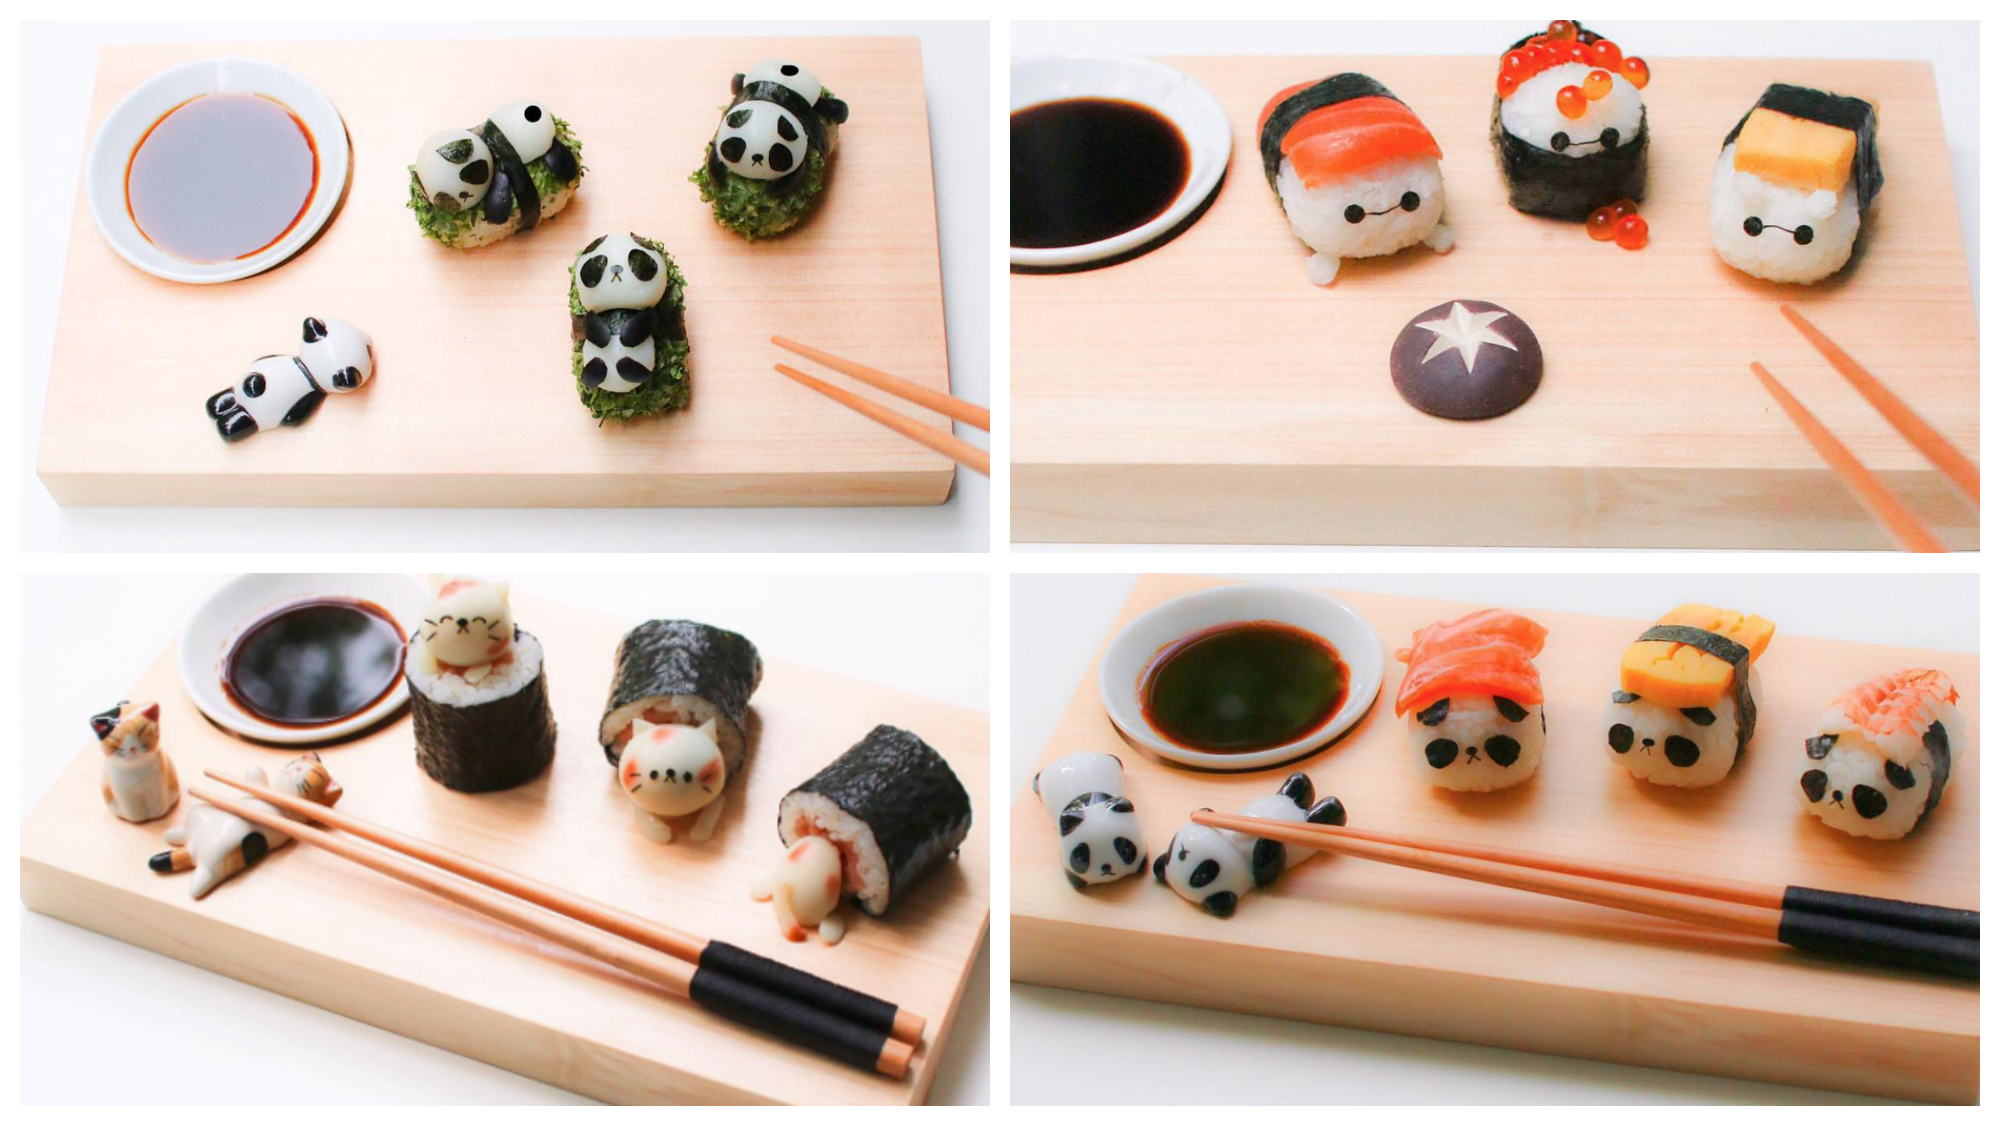 Demon Slayer Lunch Bento Box (with partition) food container Made in Japan  PL-1R OSK : Amazon.co.uk: Toys & Games